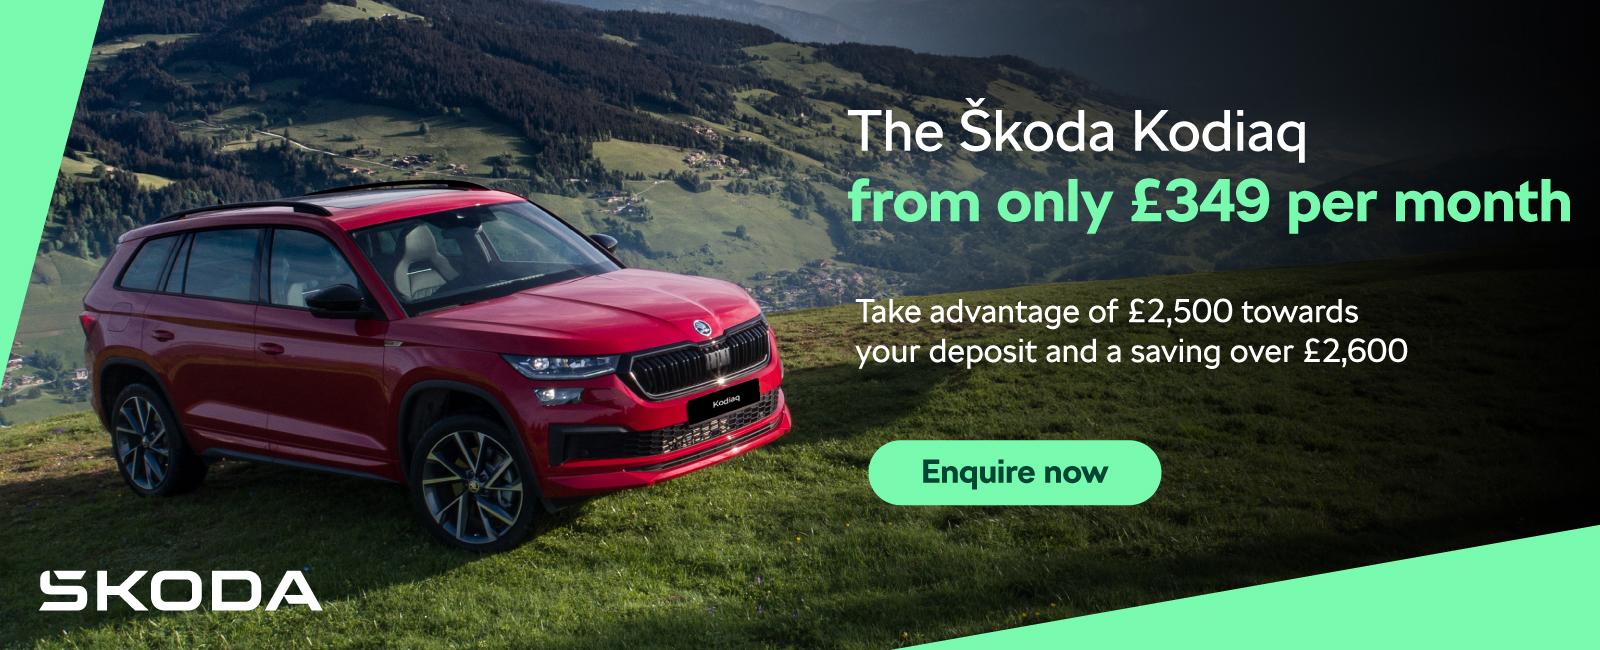 The Skoda Kodiaq from only £349 per month